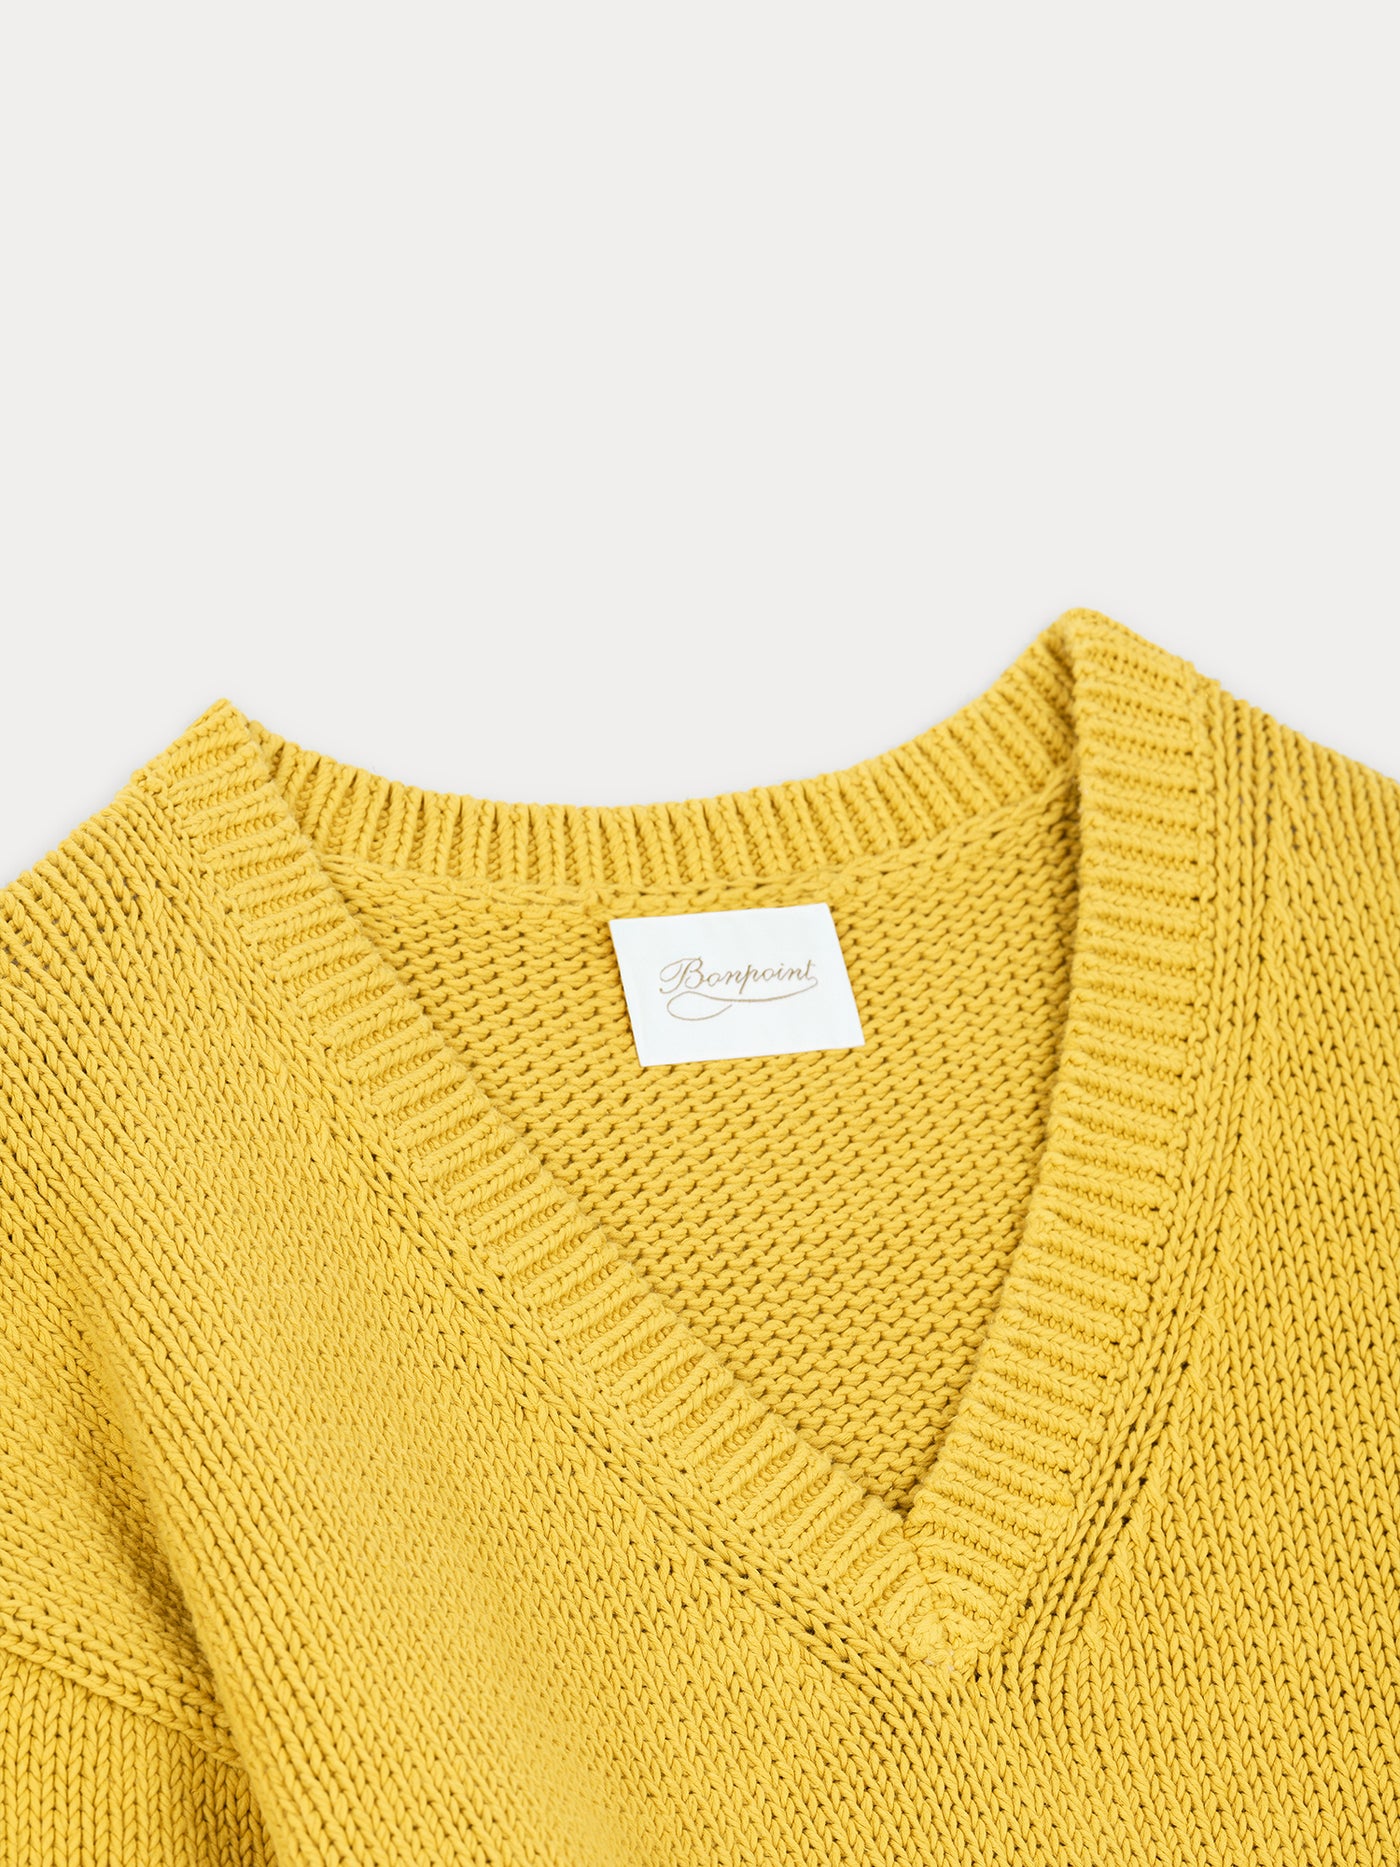 Chunky knit v-neck sweater in yellow cotton